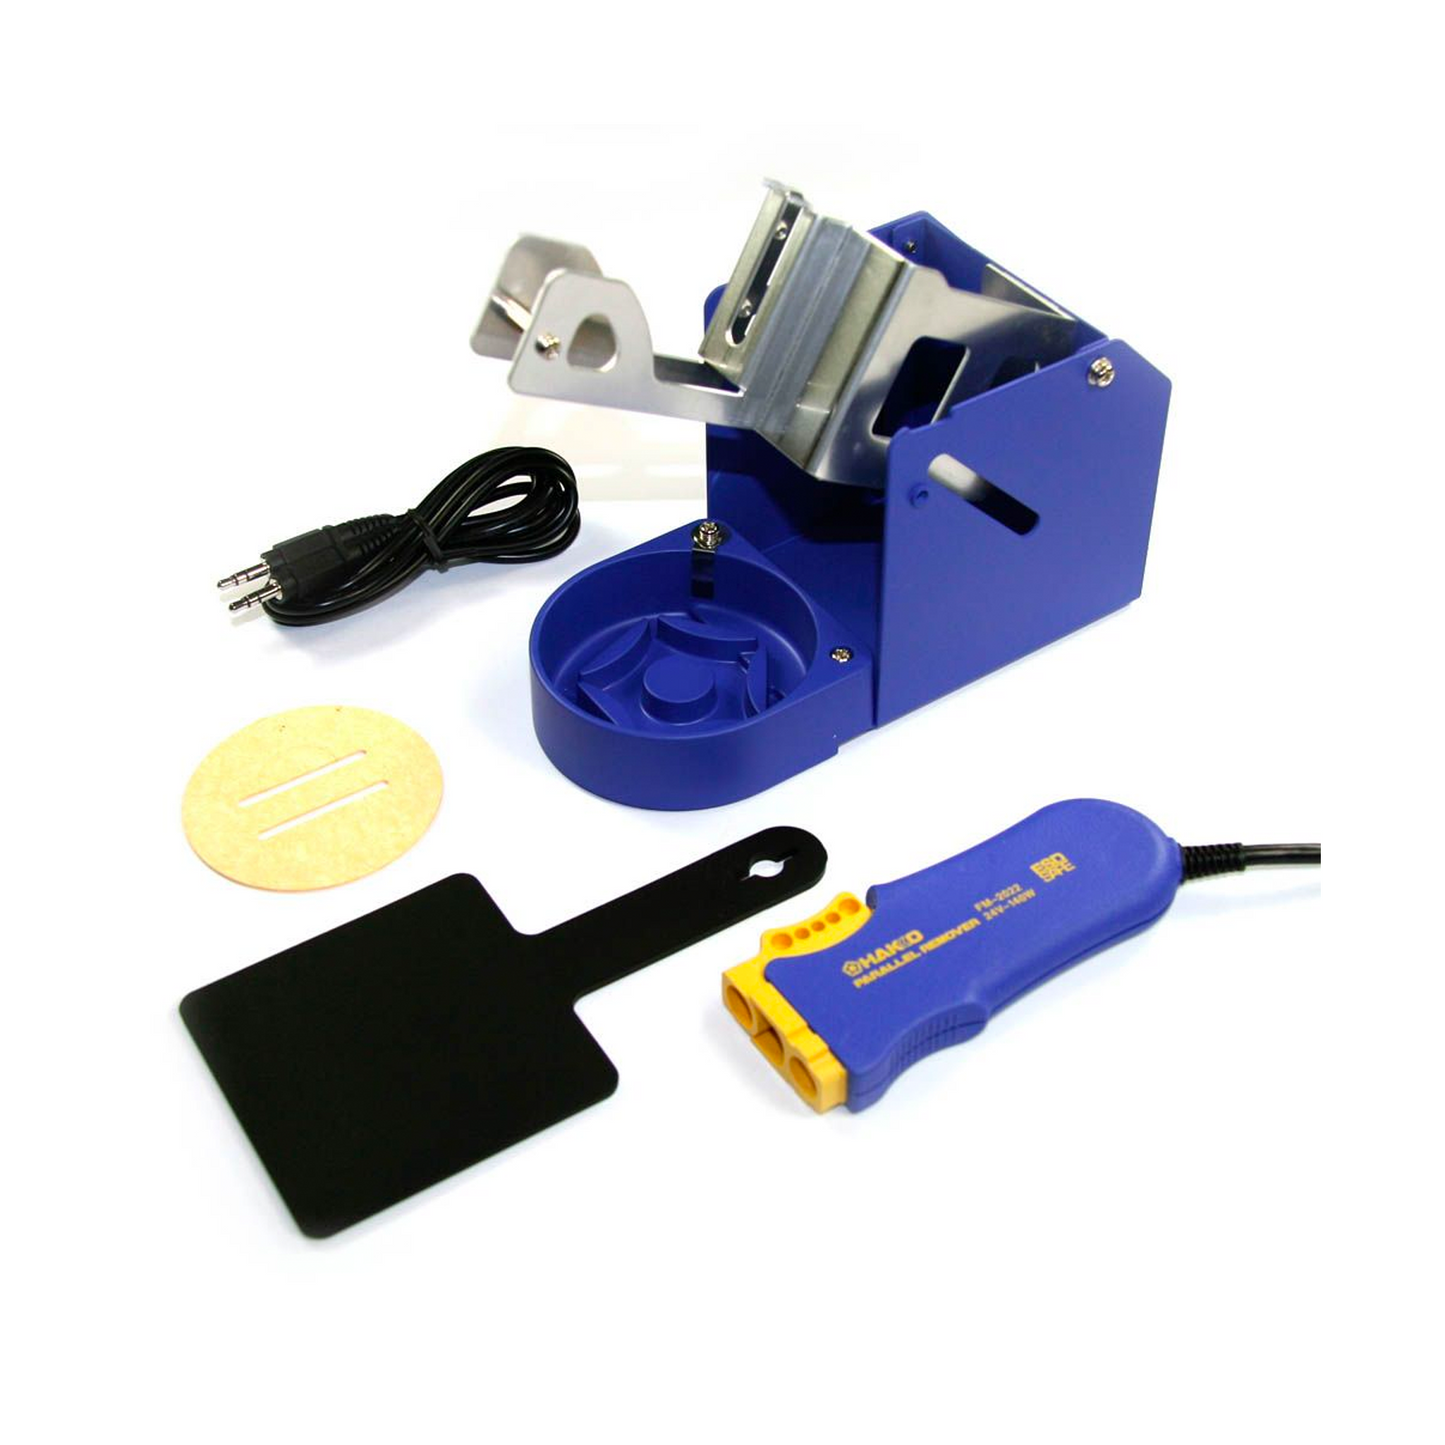 Hakko SMD hot tweezers conversion kit FM2022 including soldering iron holder cleaning sponge heat resistant pad cable